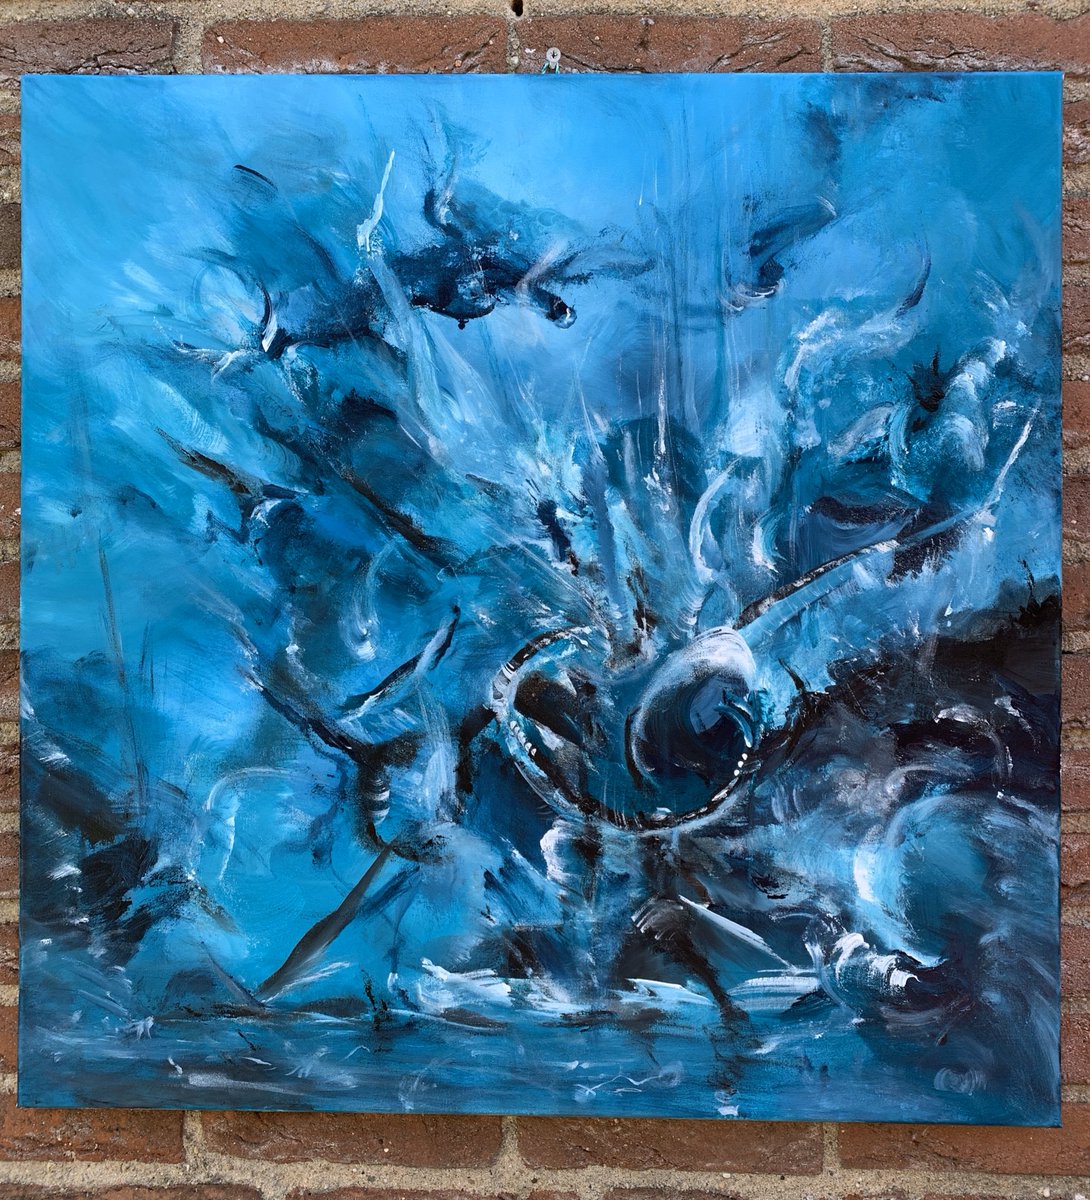 Acrylic abstract painting 🖼.
70x70cm .
I used four different blue paint 🎨 and black for this work , hope you like it 😊🖼❤️

#abstractart #artwork #artoftheday #dailyart #artist #artforyourhome #artforyourwalls #artforsale #virtualartshow 
motuncay.com